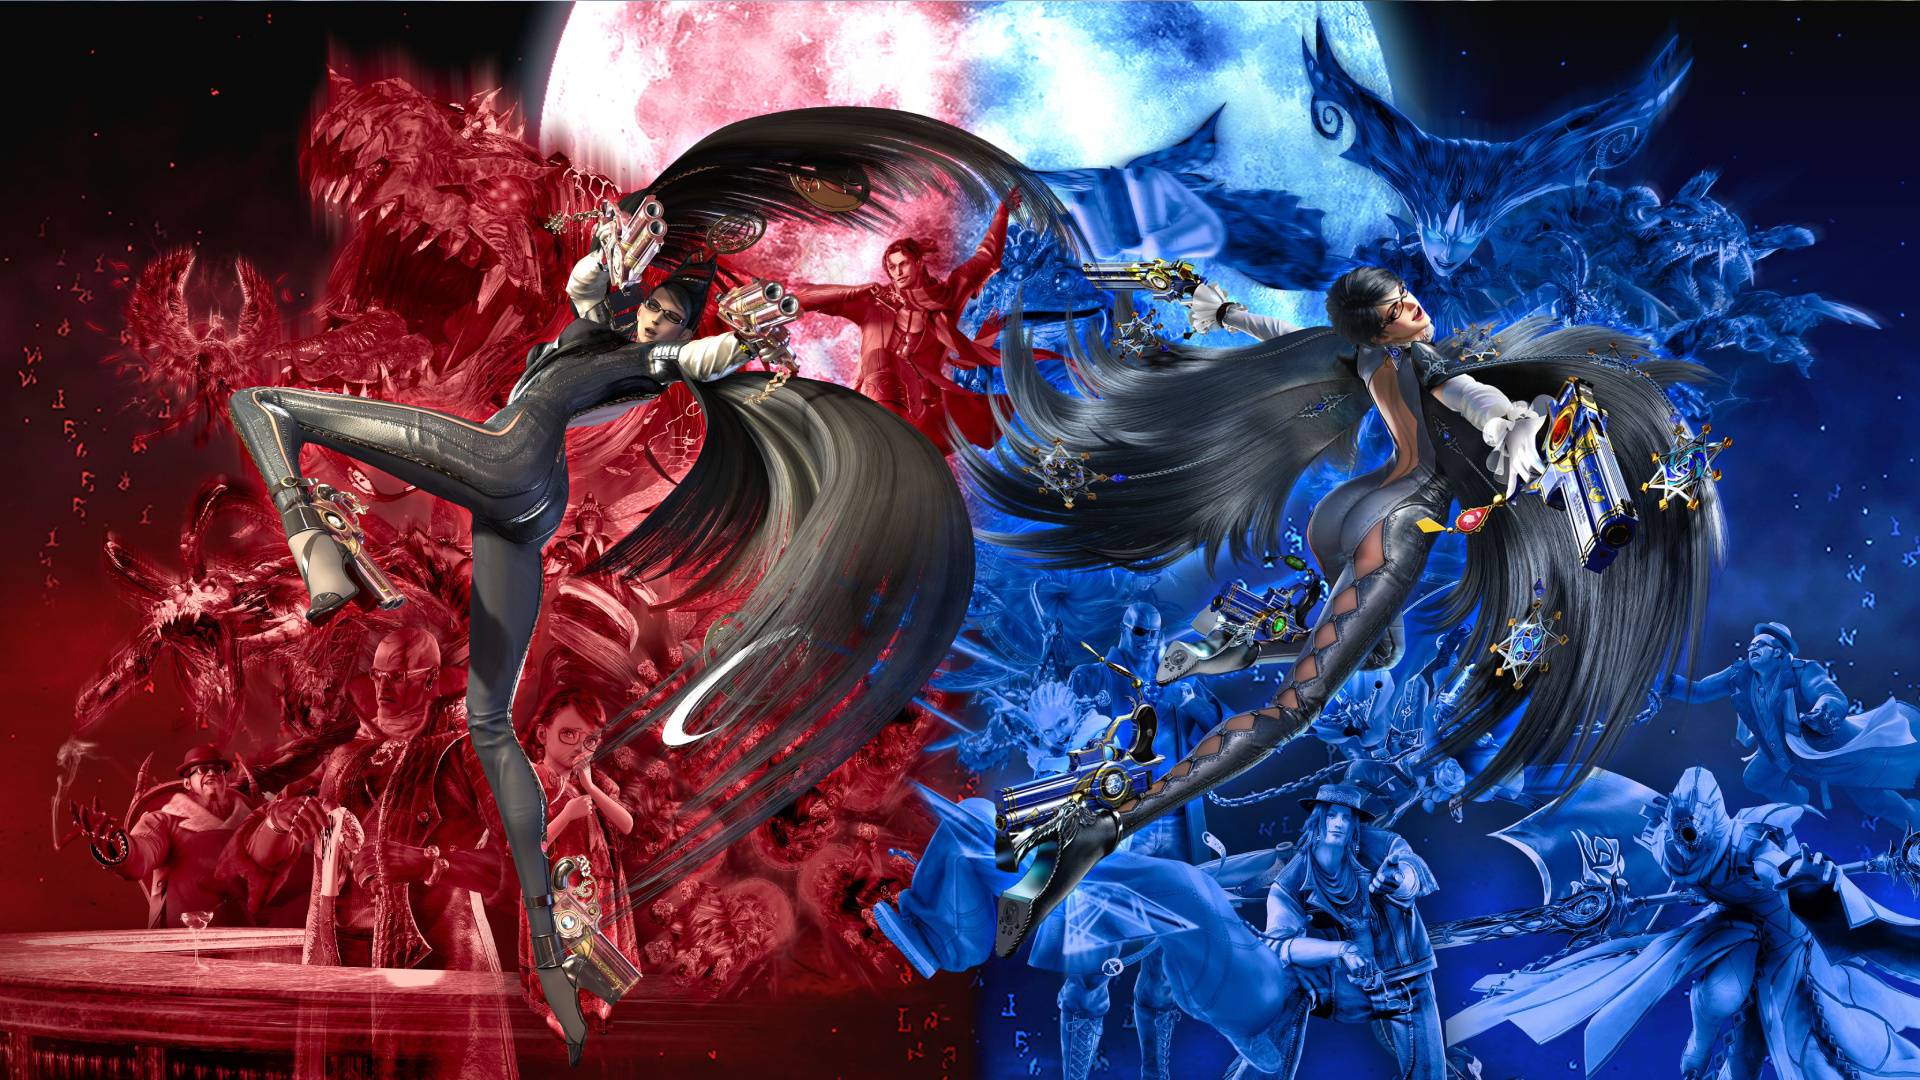 Bayonetta 3: An action hack and slash game by PlatinumGames, Nintendo. 1920x1080 Full HD Background.